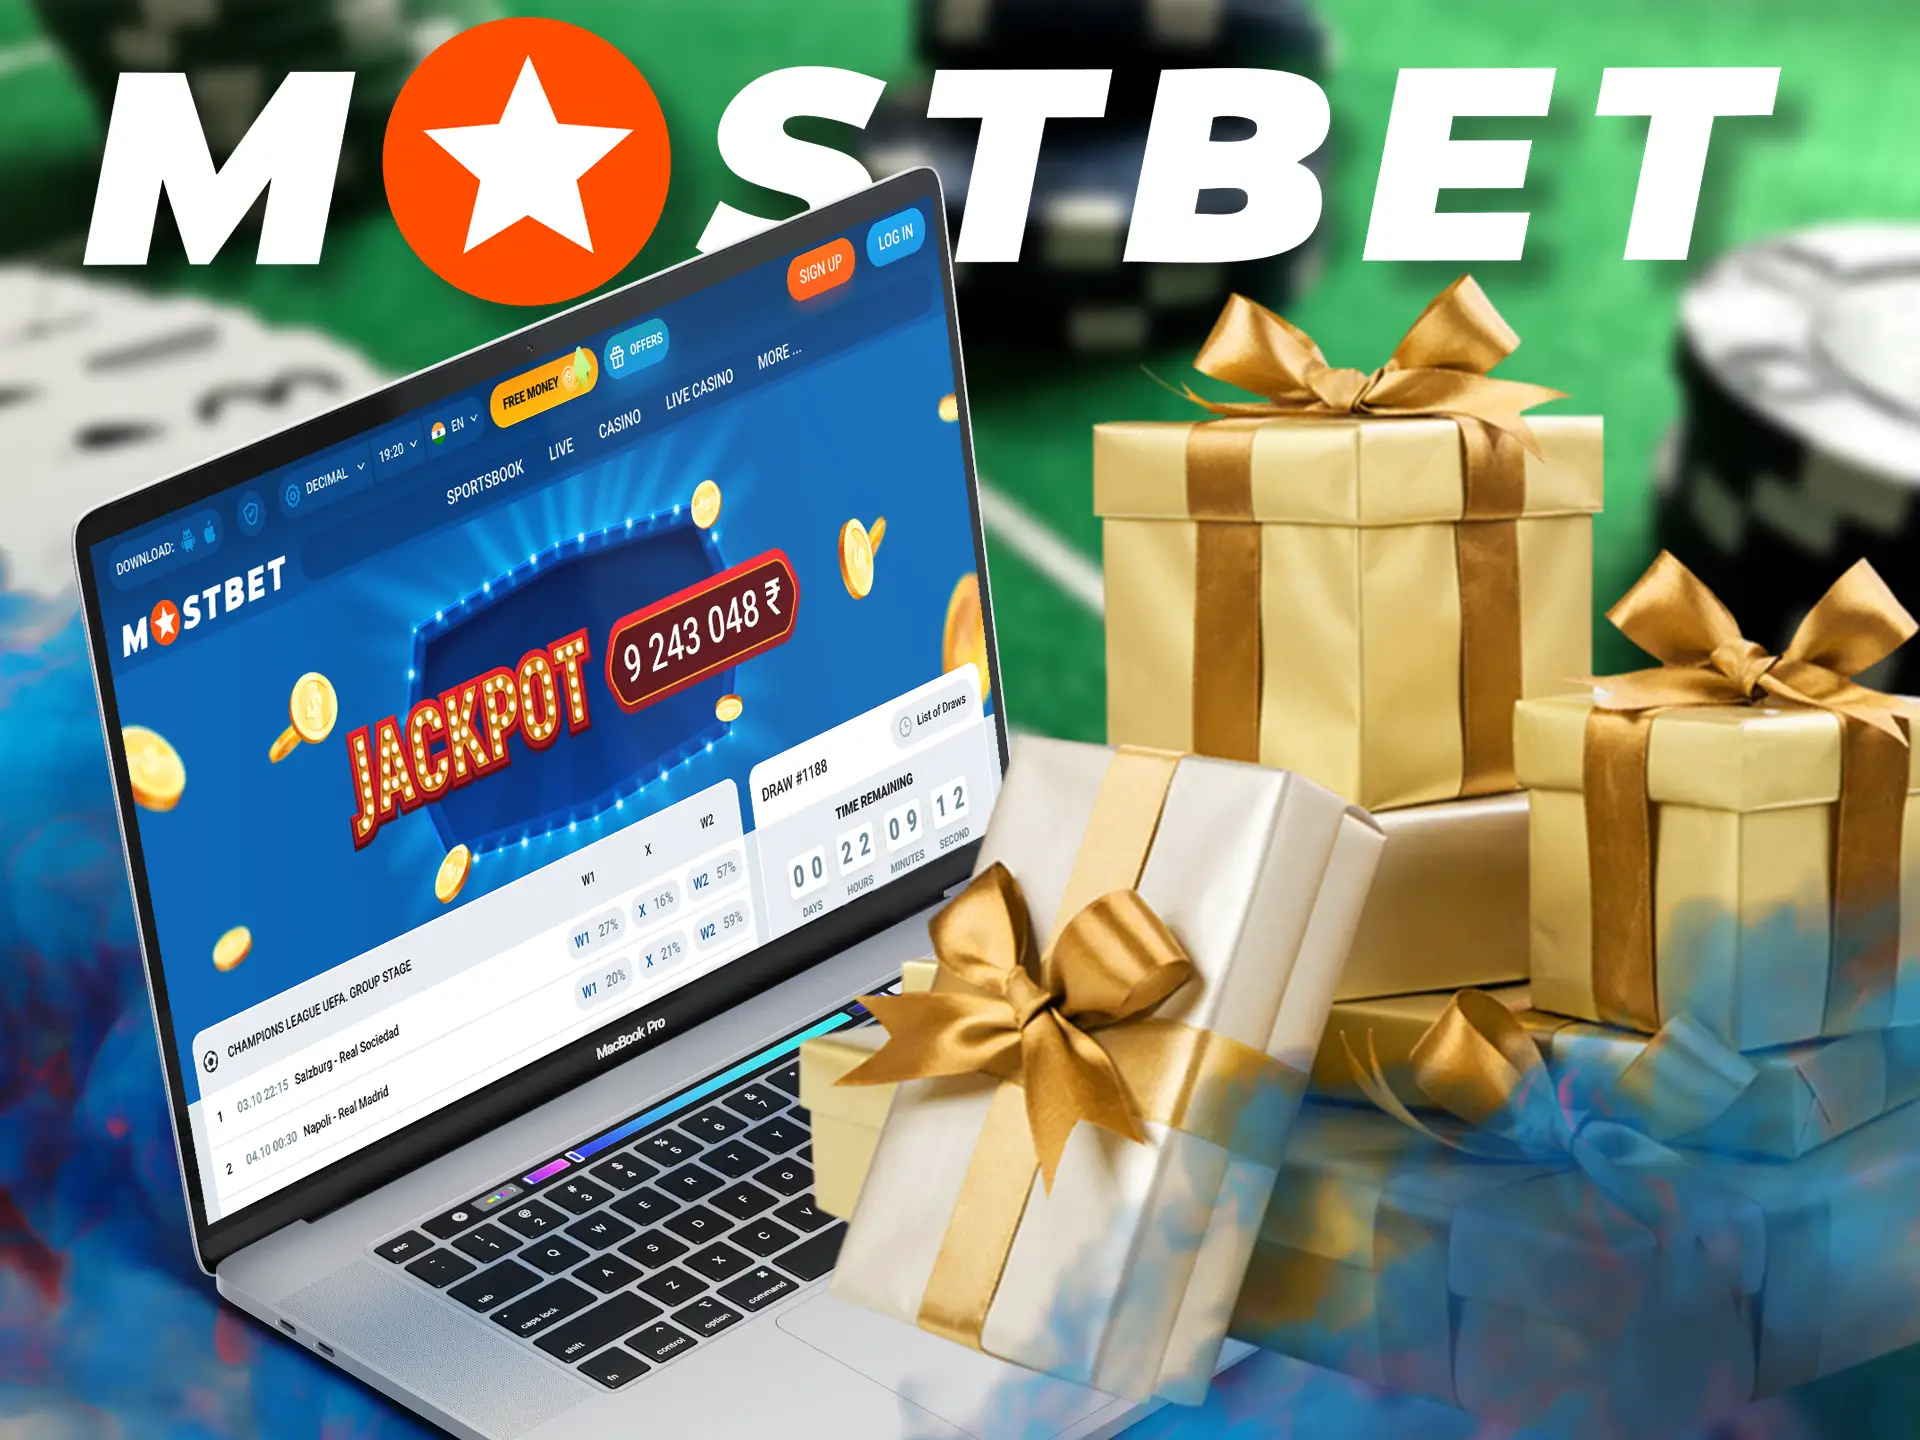 Users can receive special offers after registering with Mostbet, this is so that they can get used to the platform sooner.